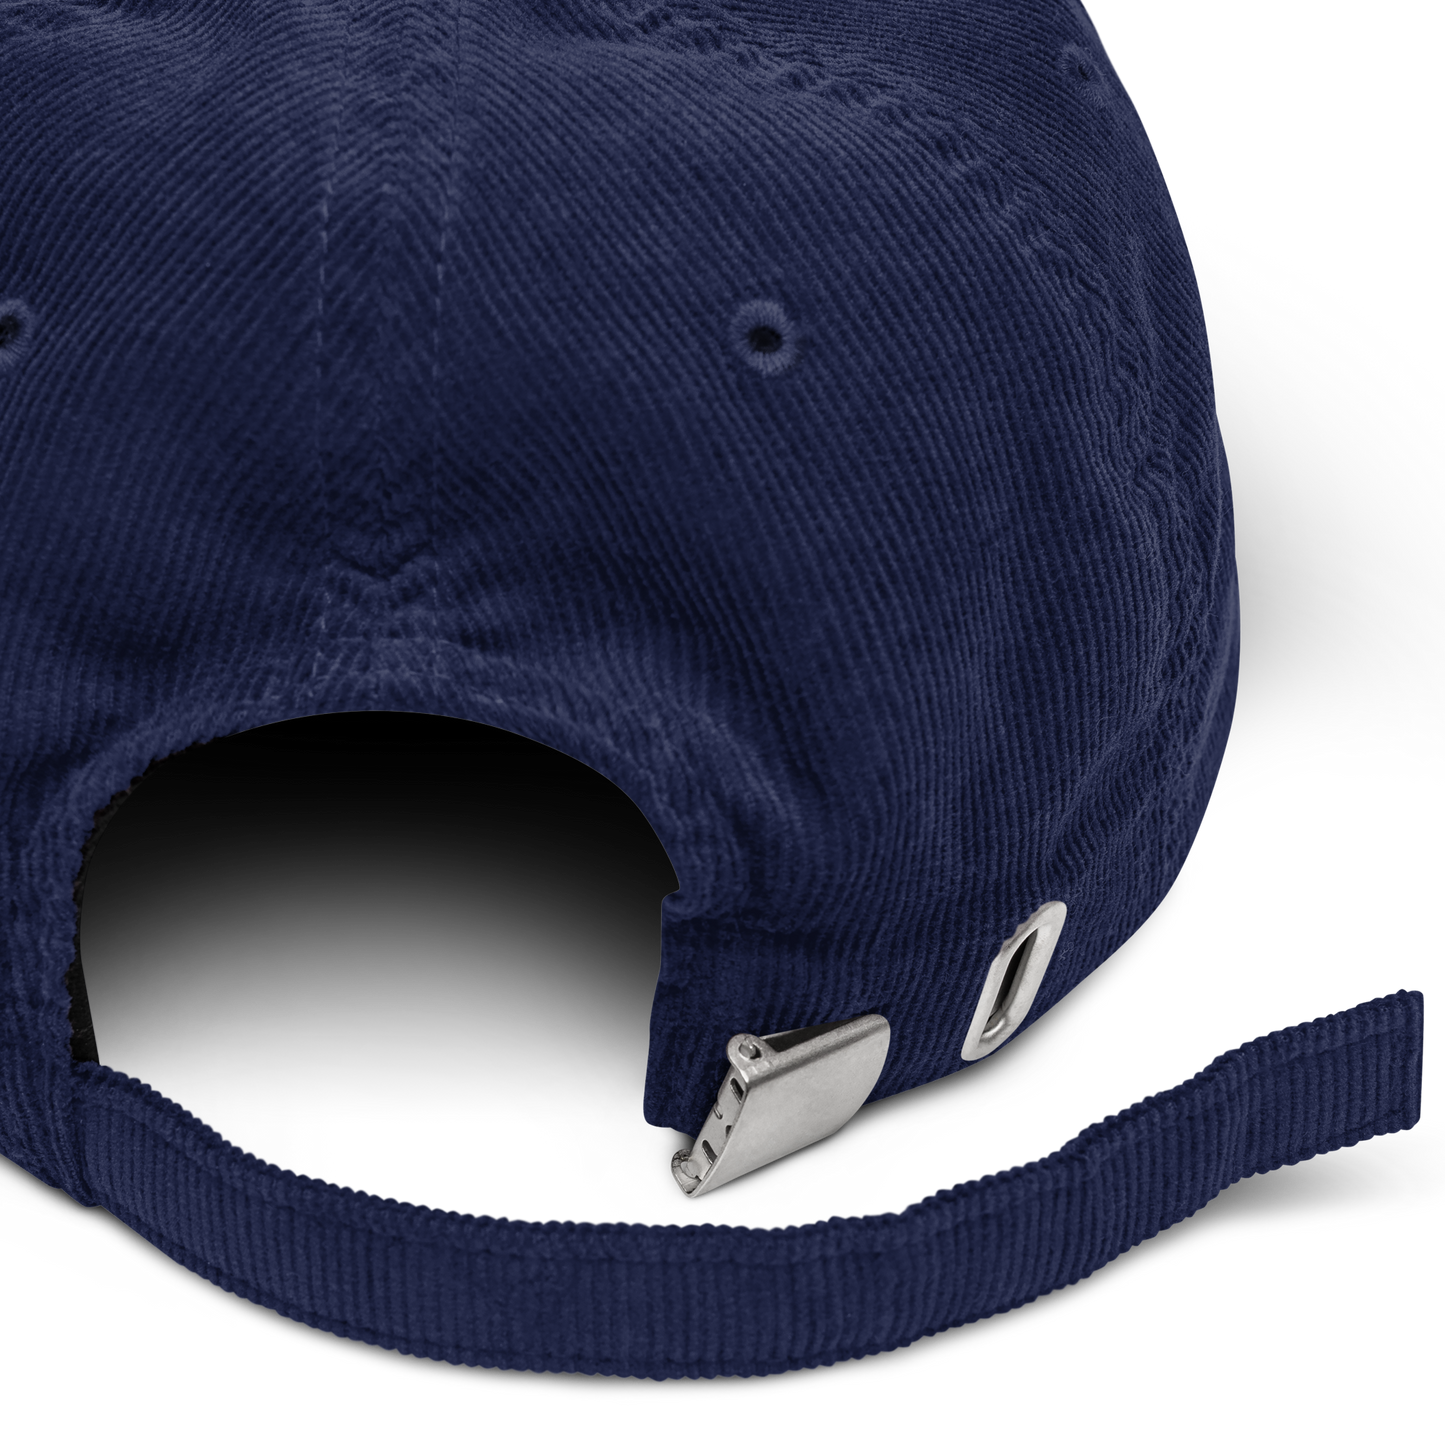 Product details of a Oxford Navy Corduroy Hat featuring an embroidered Boozy Fox logo on front. Shop Cool Corduroy Hats & Corduroy Caps Online - Boozy Fox